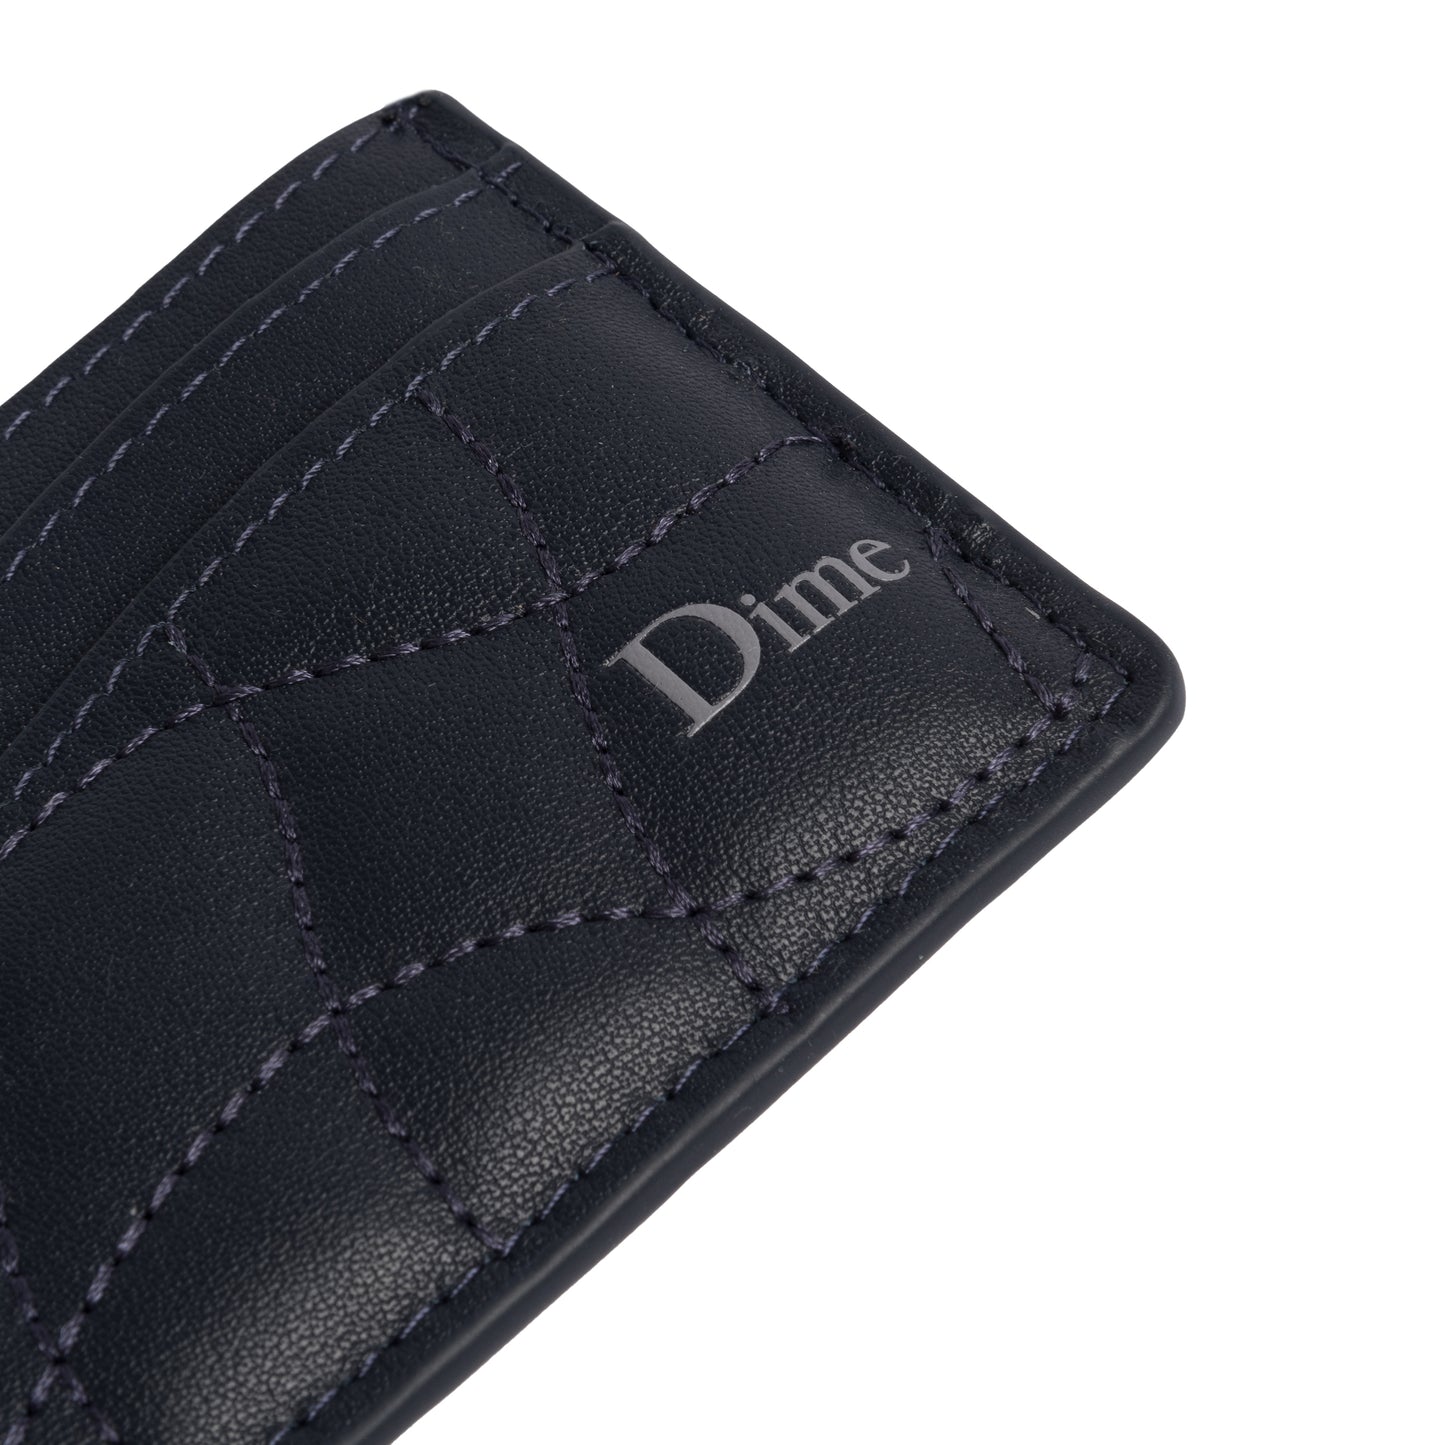 Dime QUILTED CARDHOLDER